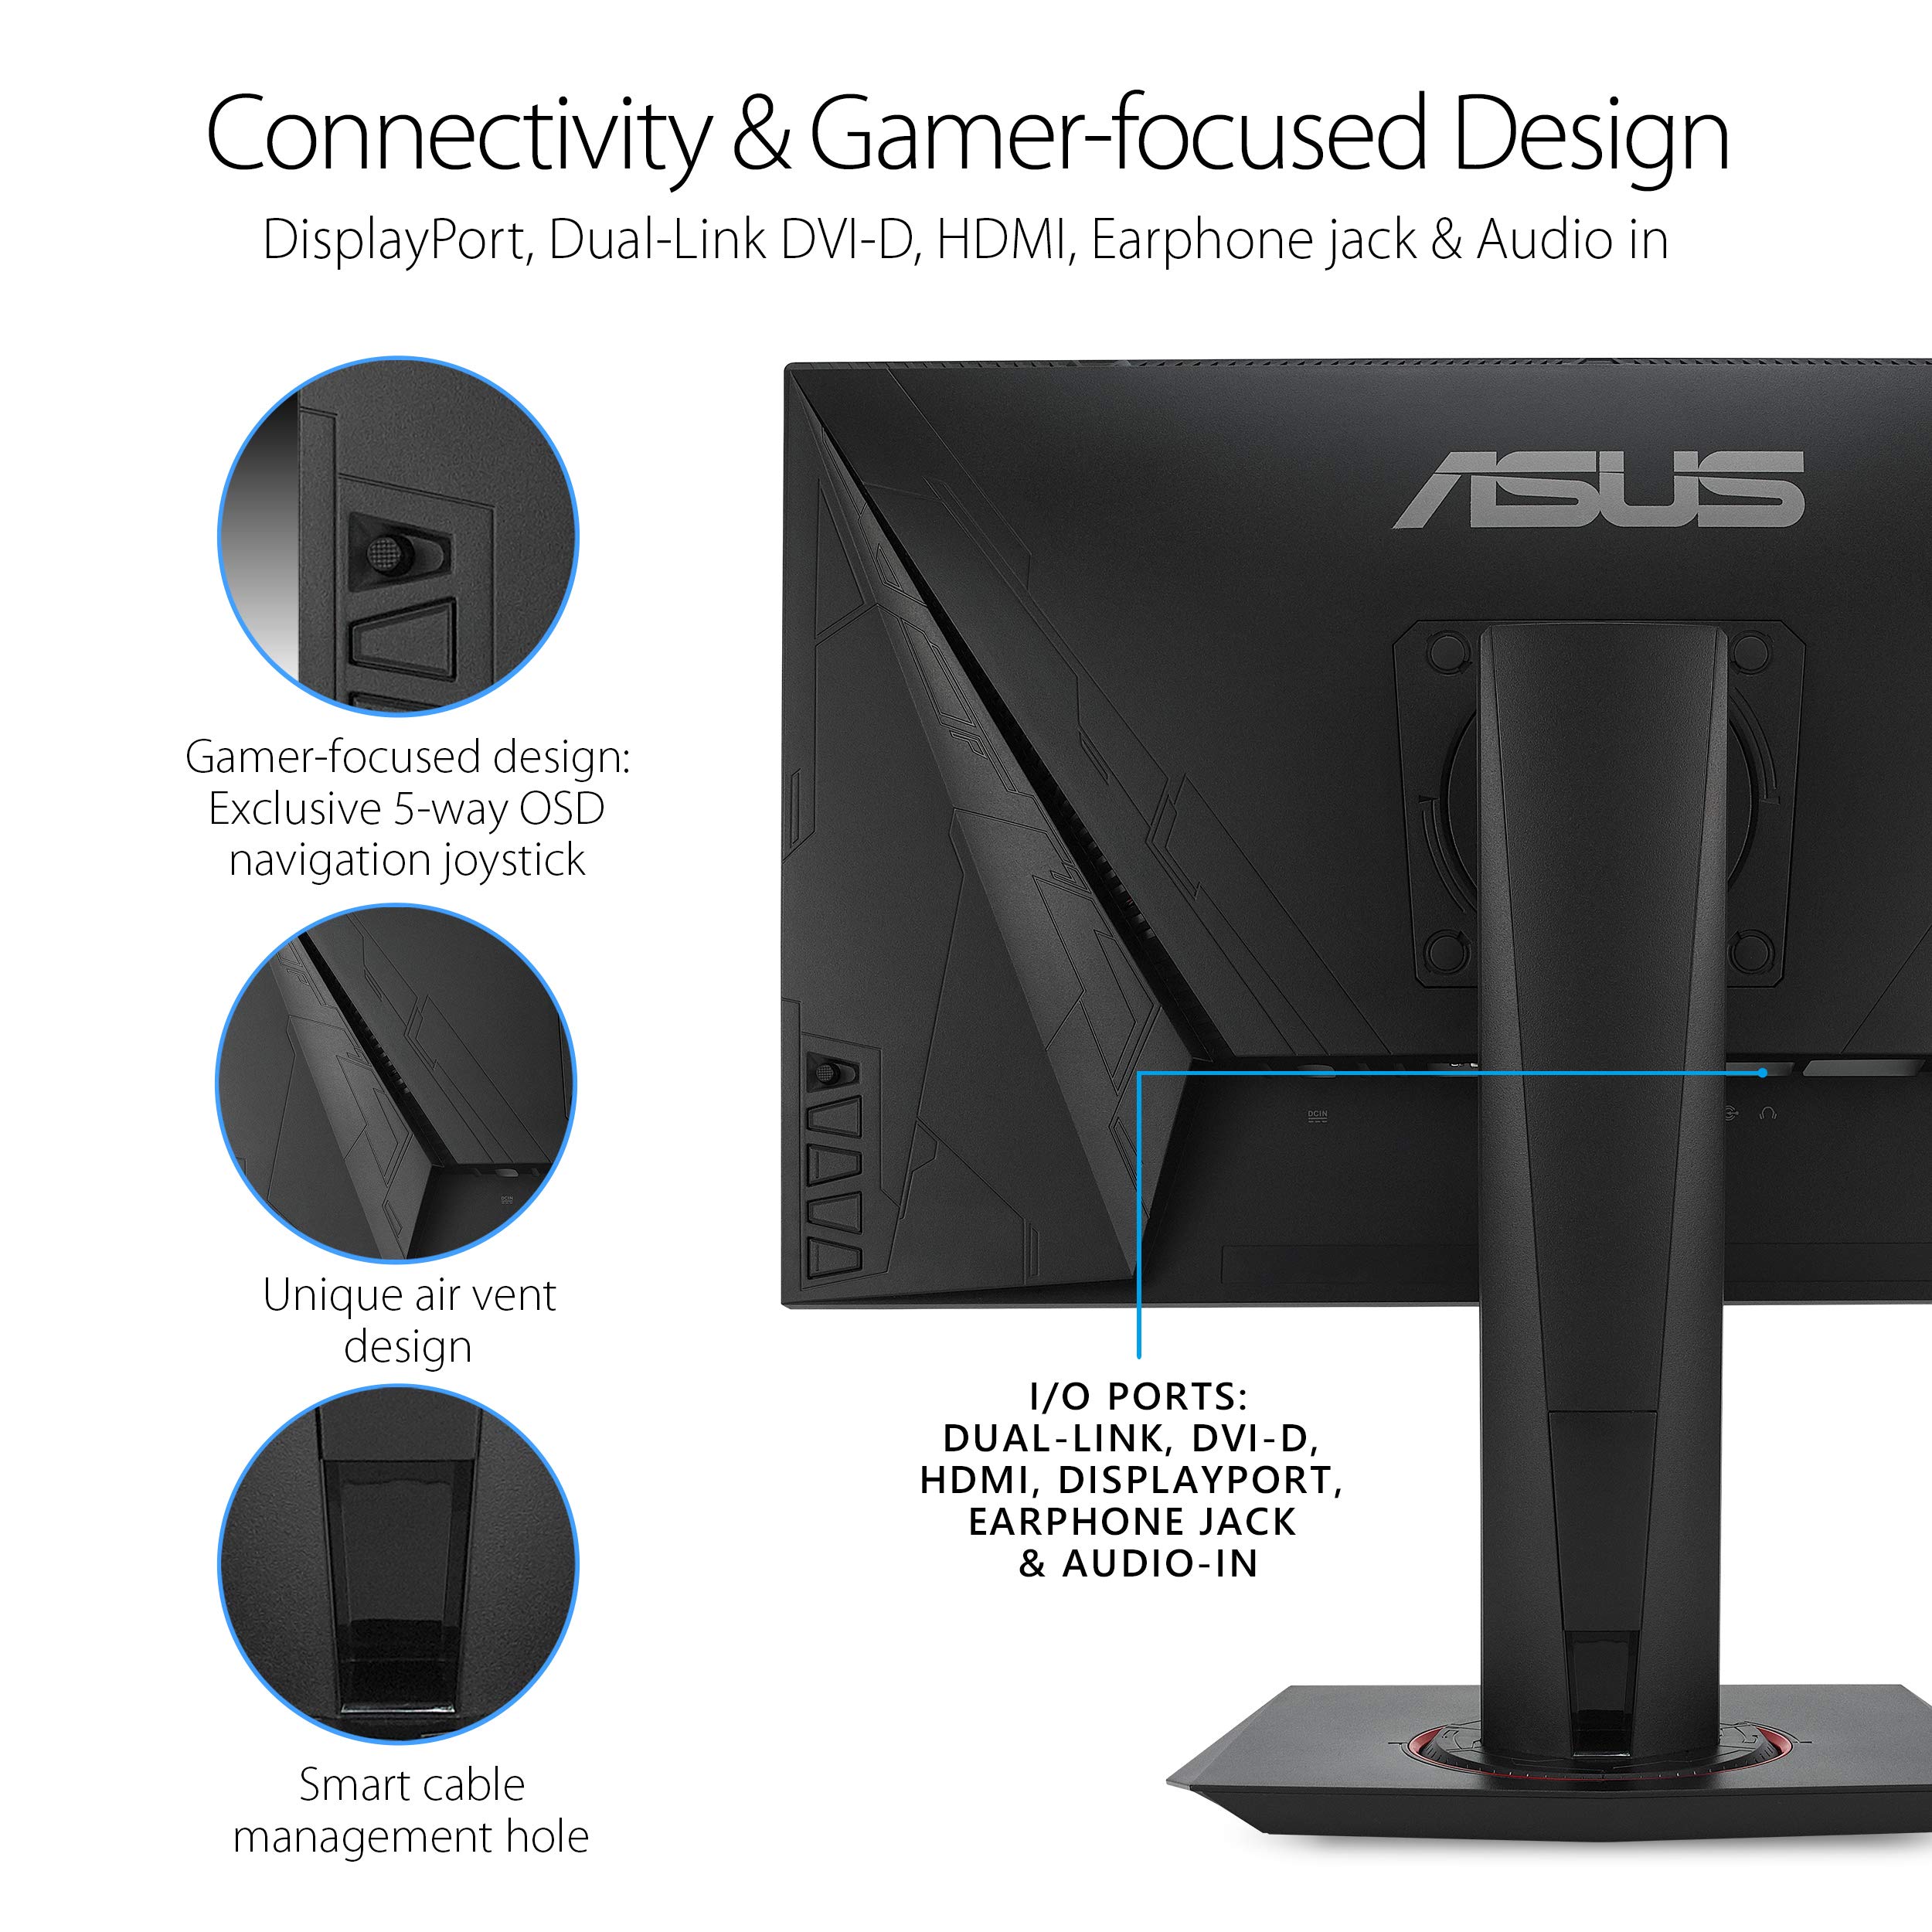 ASUS 24.5" 1080P Gaming Monitor (VG258QR) - Full HD, 165Hz (Supports 144Hz), 0.5ms, Extreme Low Motion Blur, Speaker, Adaptive-Sync, G-SYNC Compatible, VESA Mountable, DisplayPort, HDMI, DVI-D, Black